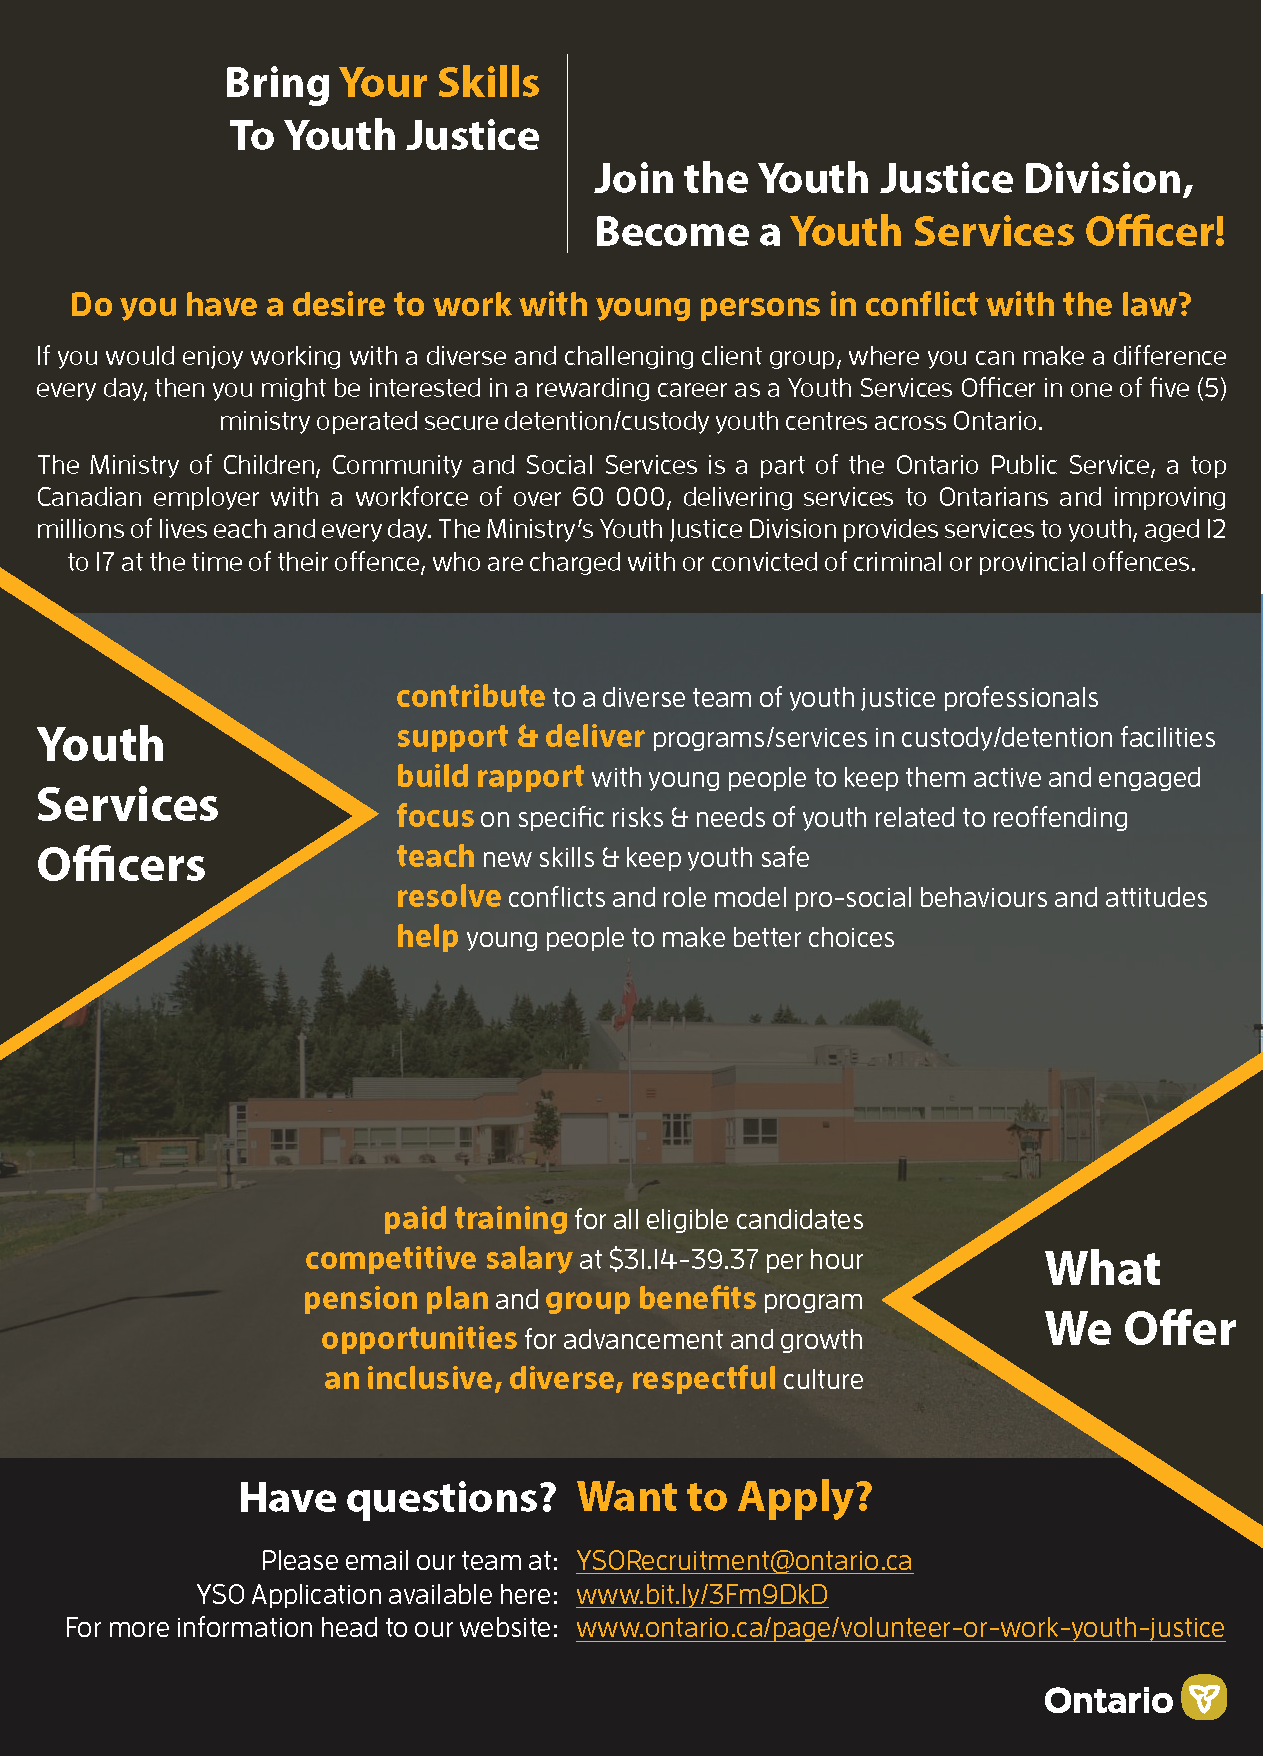 Youth Services info